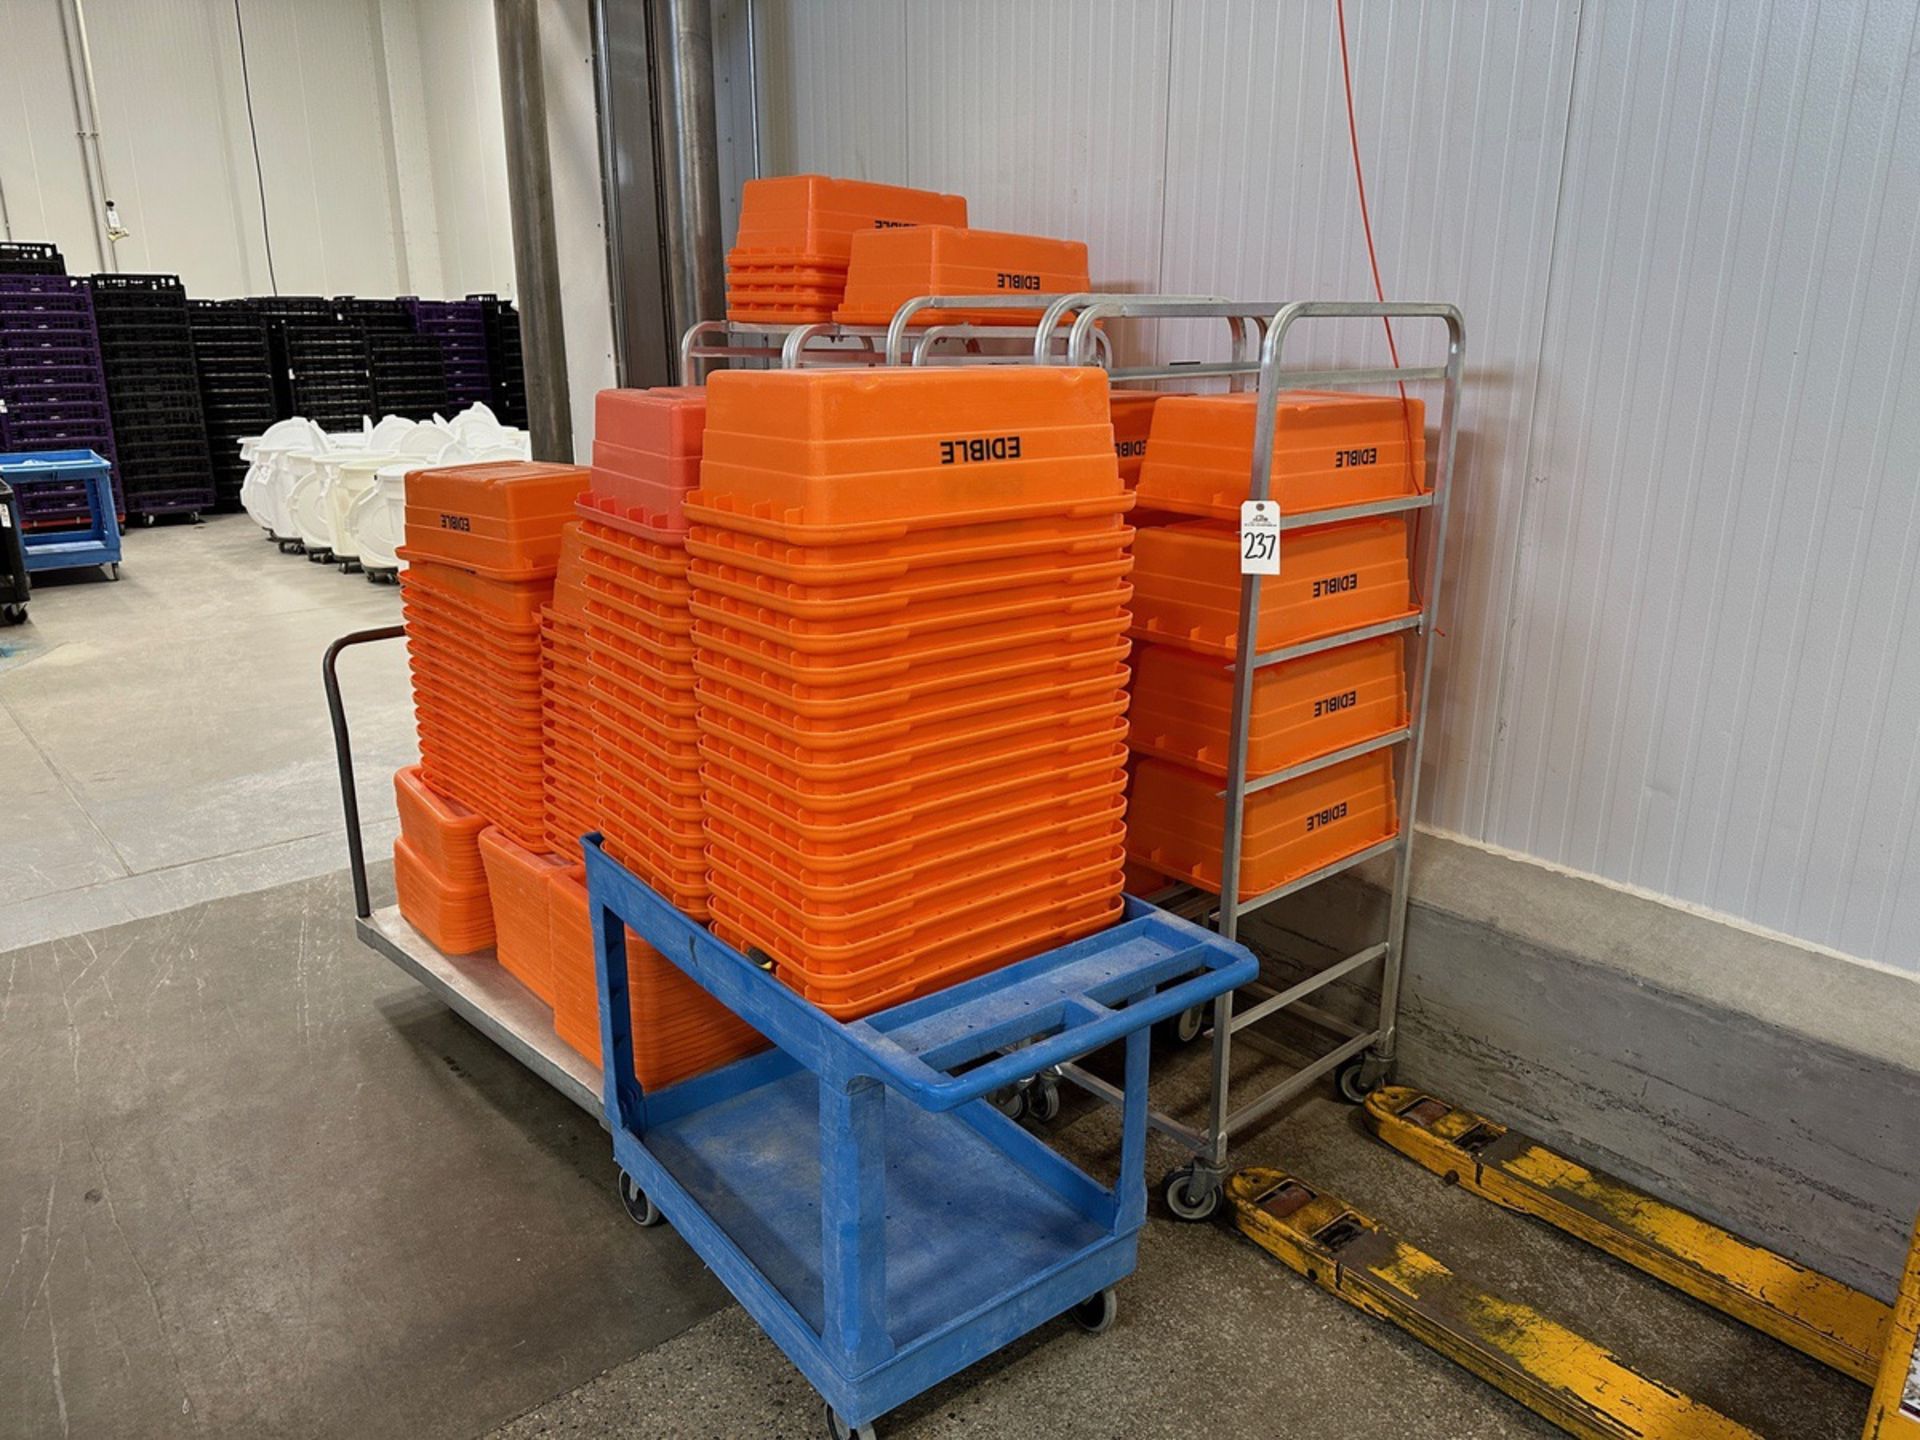 Lot of Orange Plastic "Edible" Food Containers (Approx. 15" x 2') with (4) Aluminum | Rig Fee $200